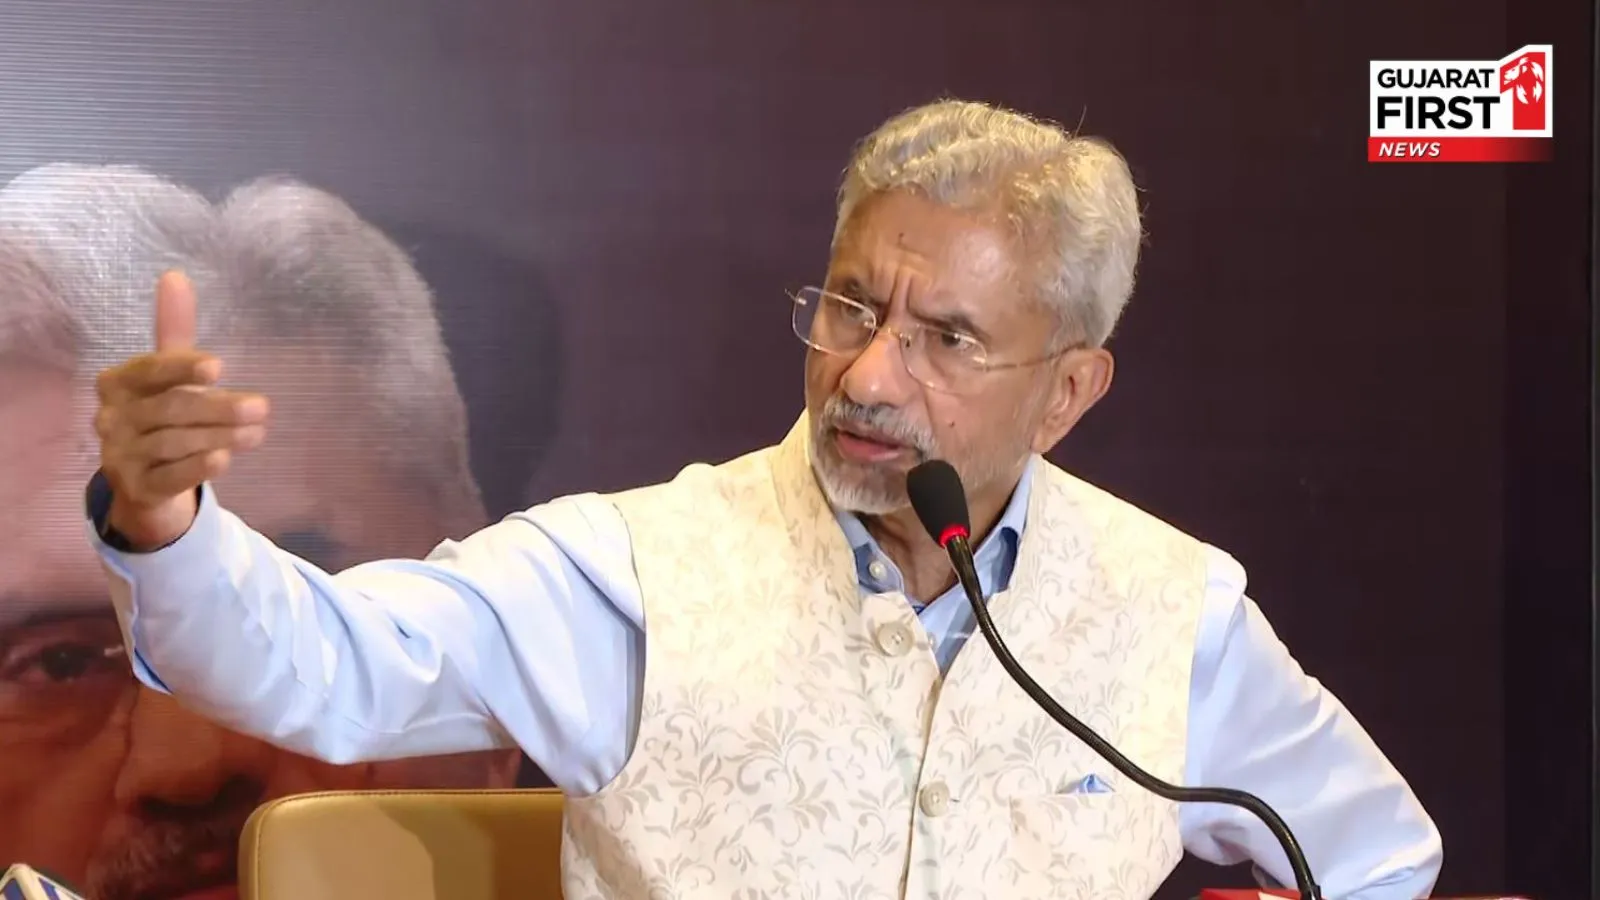 In Surat, Foreign Minister S Jaishankar said that Arunachal Pradesh is and will remain an Indian state.